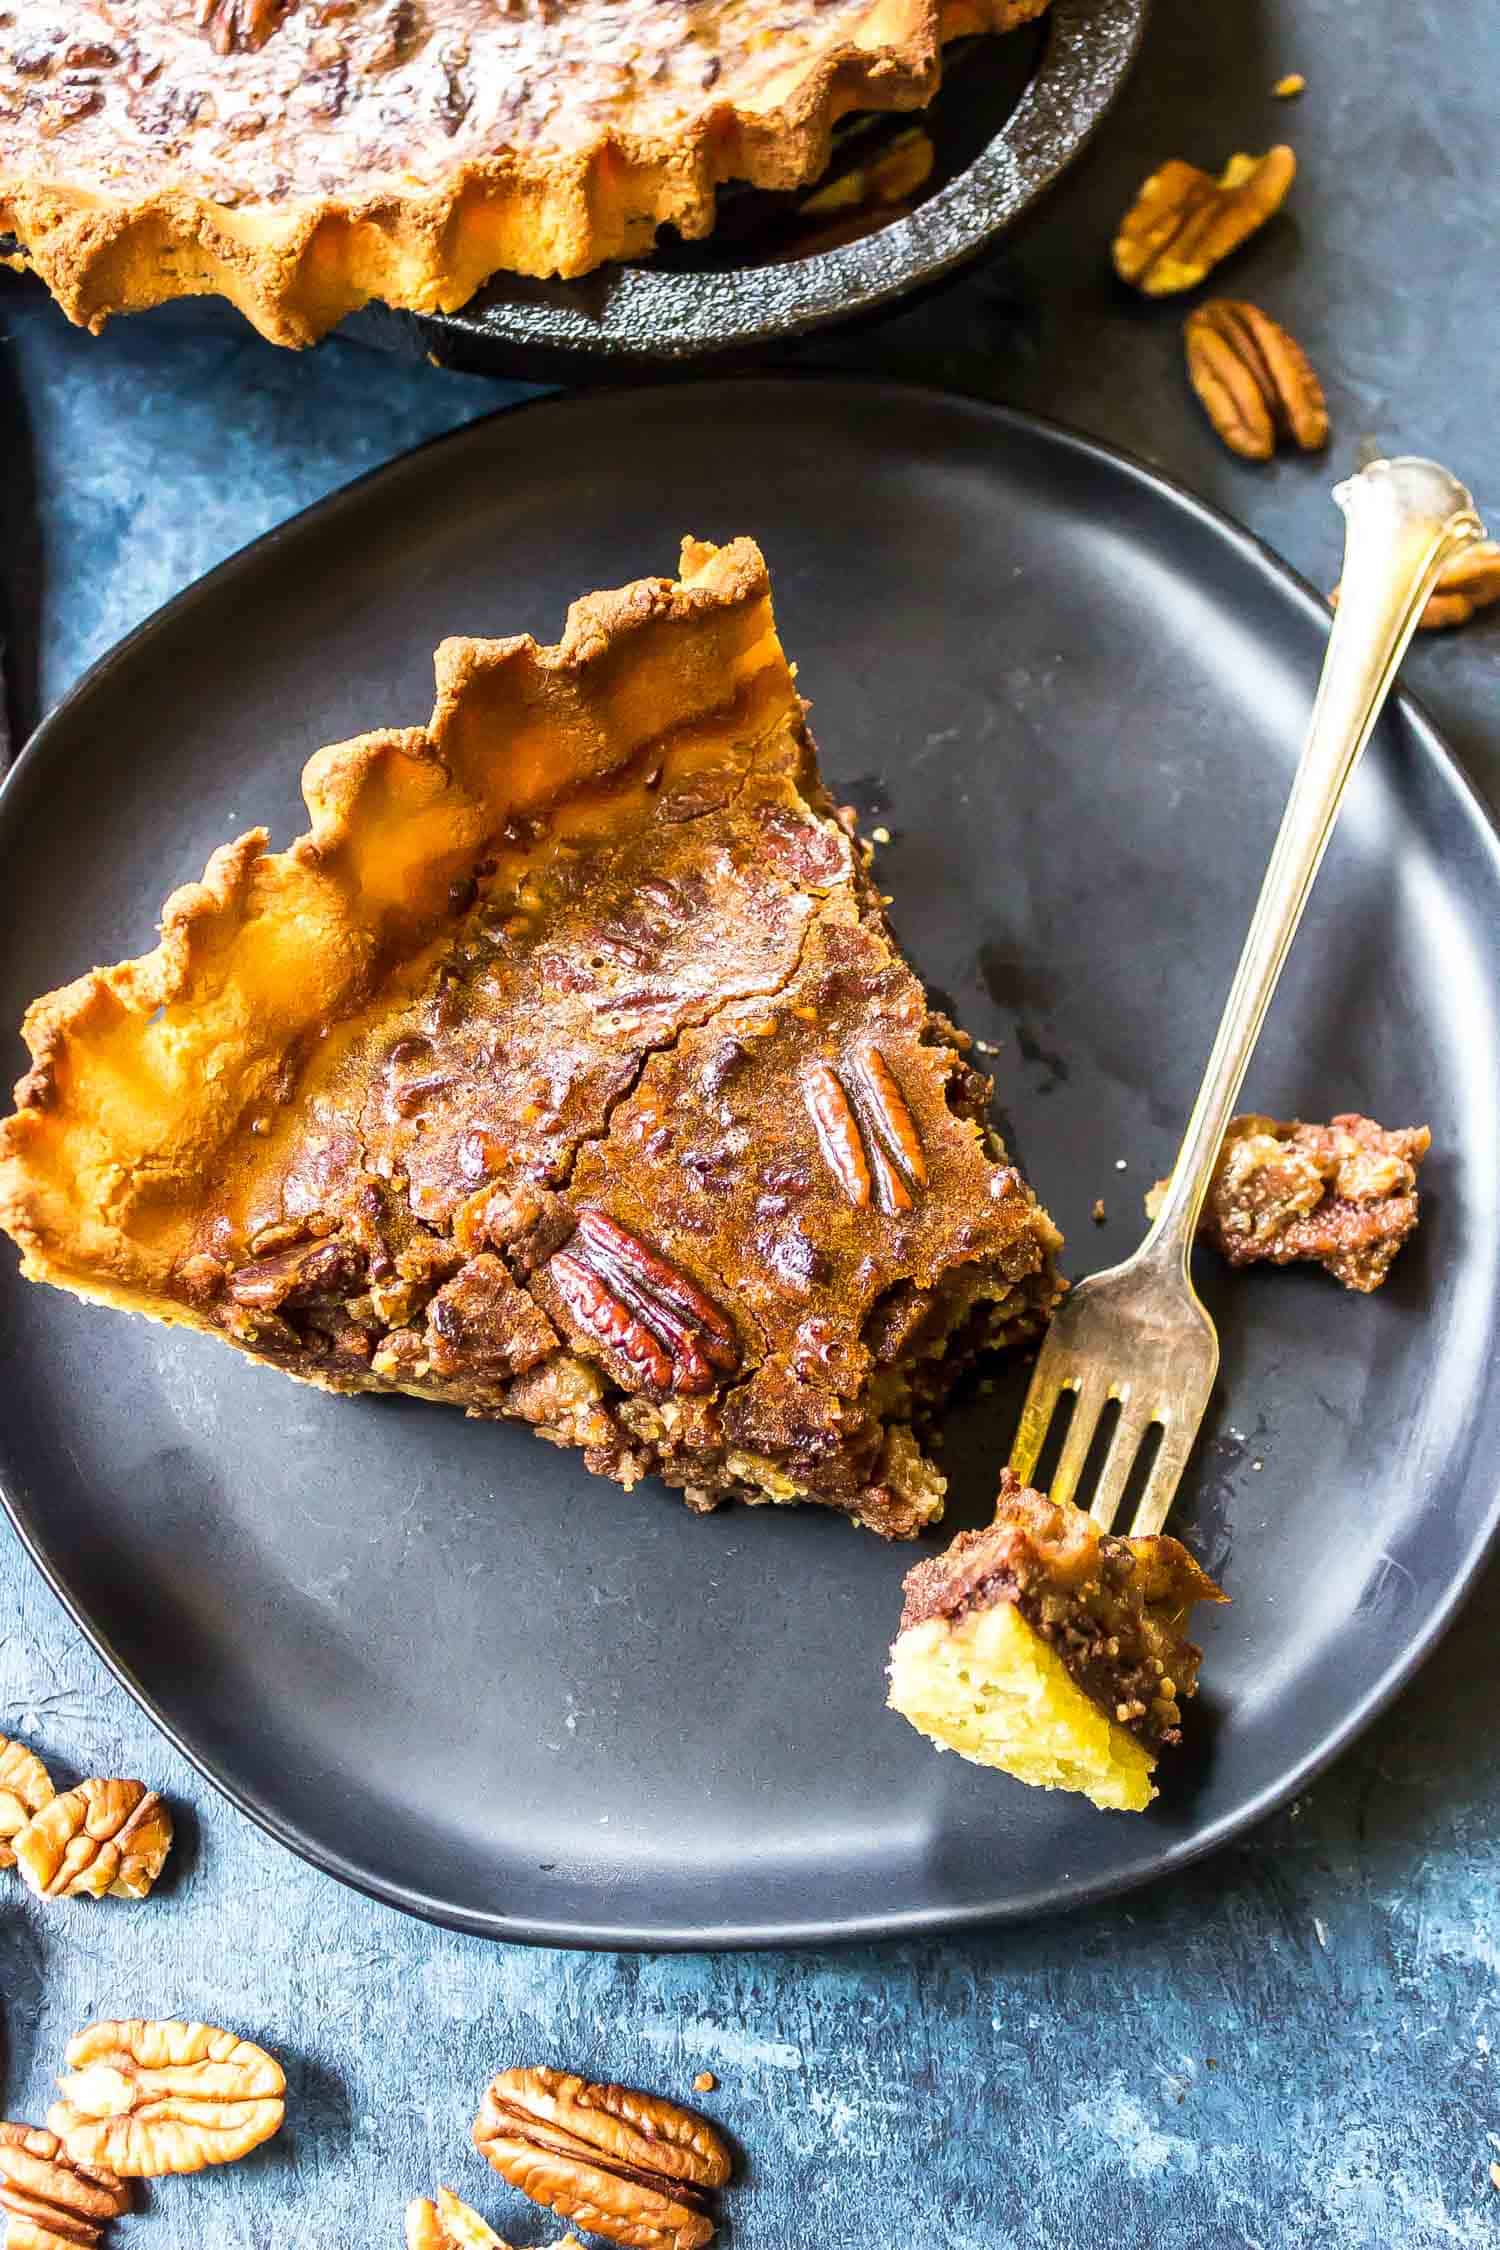 Keto Pecan Pie slice on a black plate with a fork taking a bite out of the end